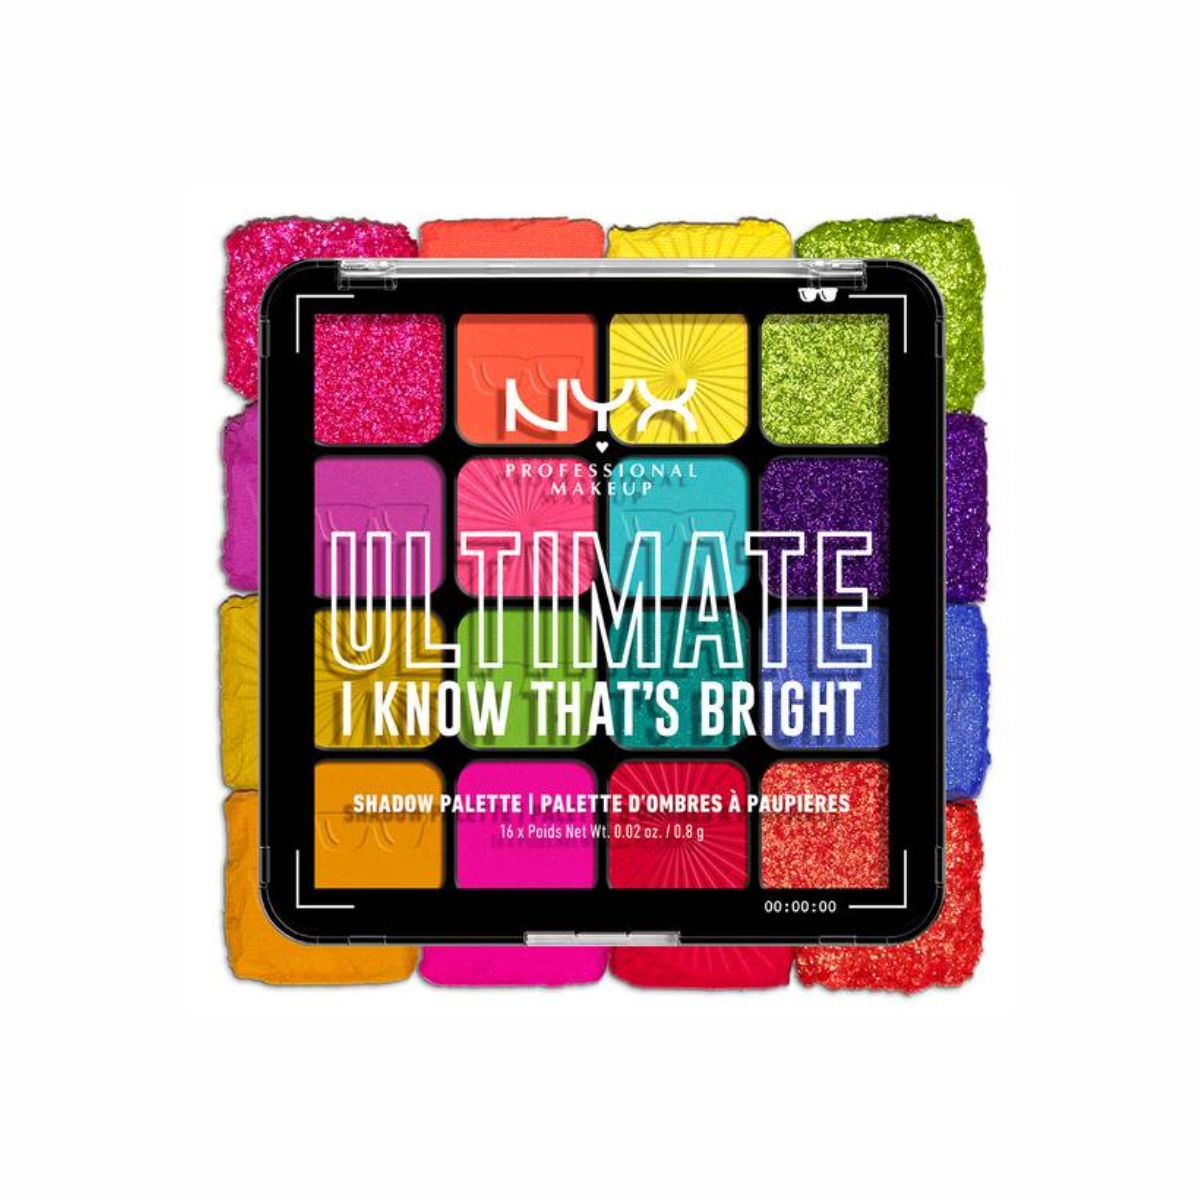 PALETA DE SOMBRAS ULTIMATE SHADOW I KNOW THATS BRIGHT - NYX PROFESSIONAL MAKEUP